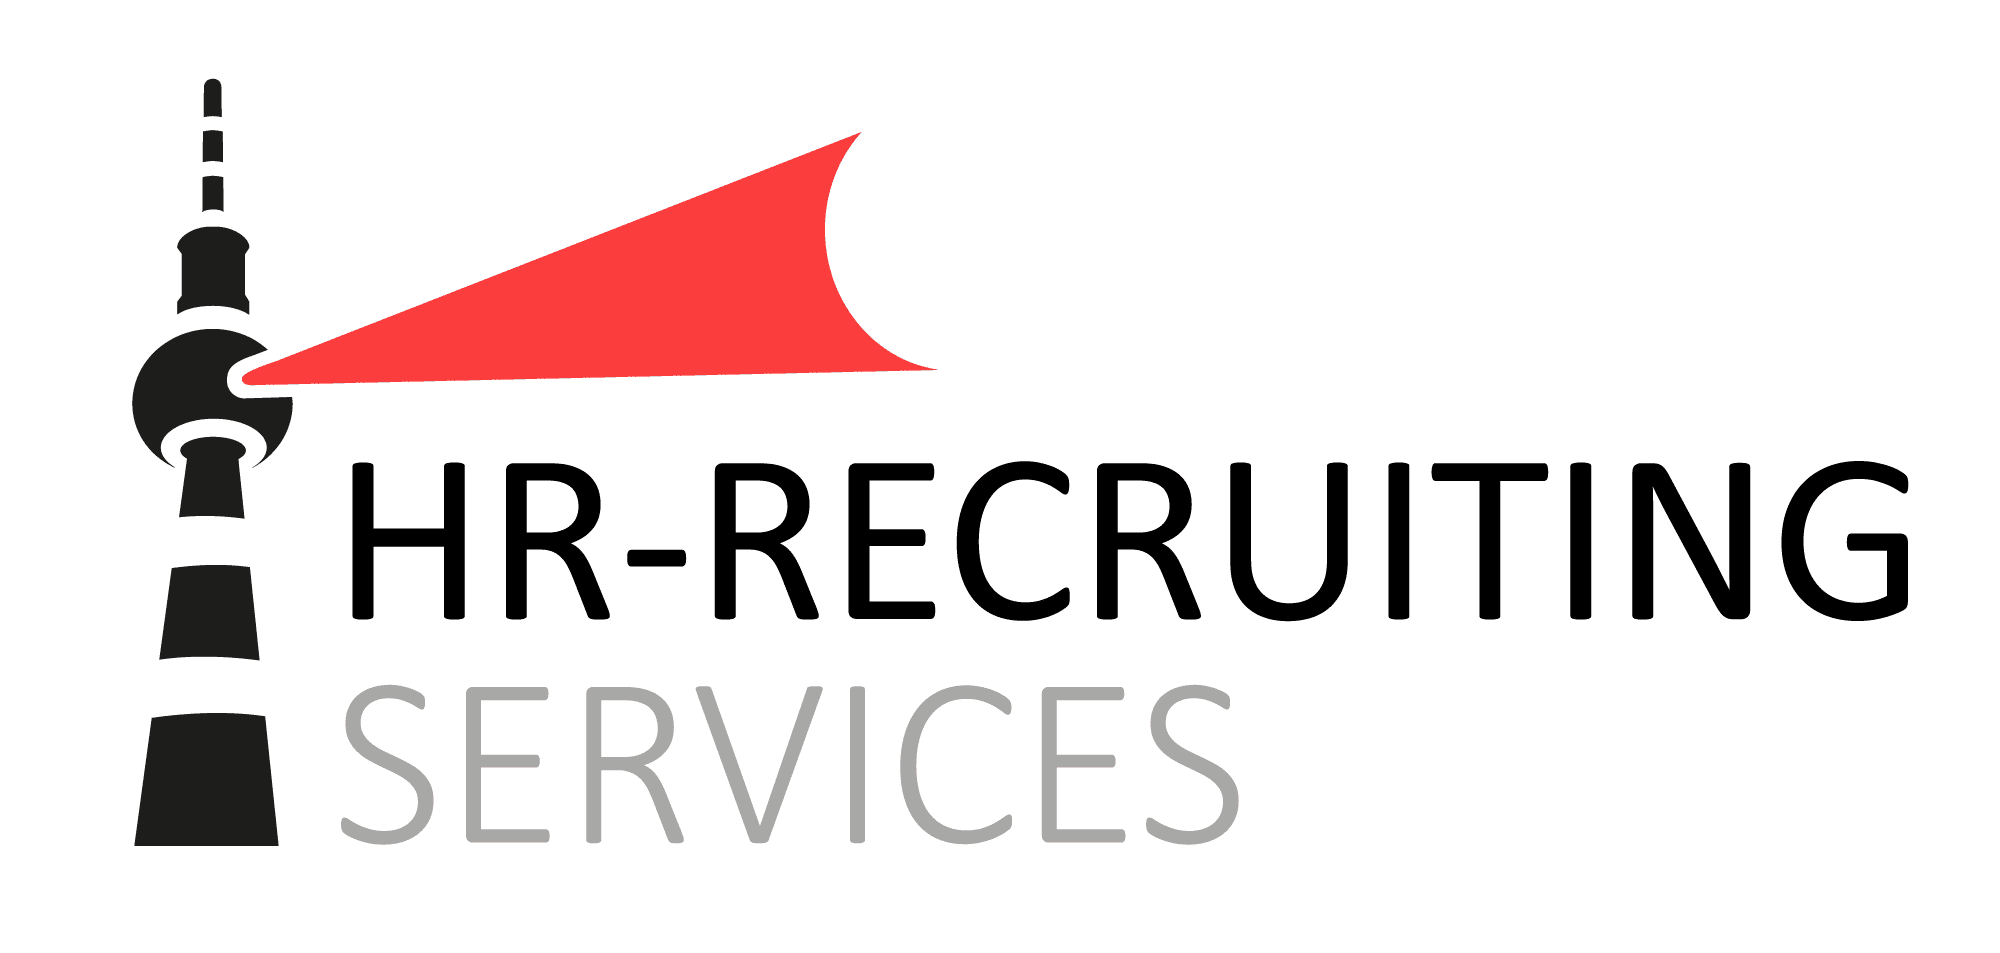 HR-Recruiting Services